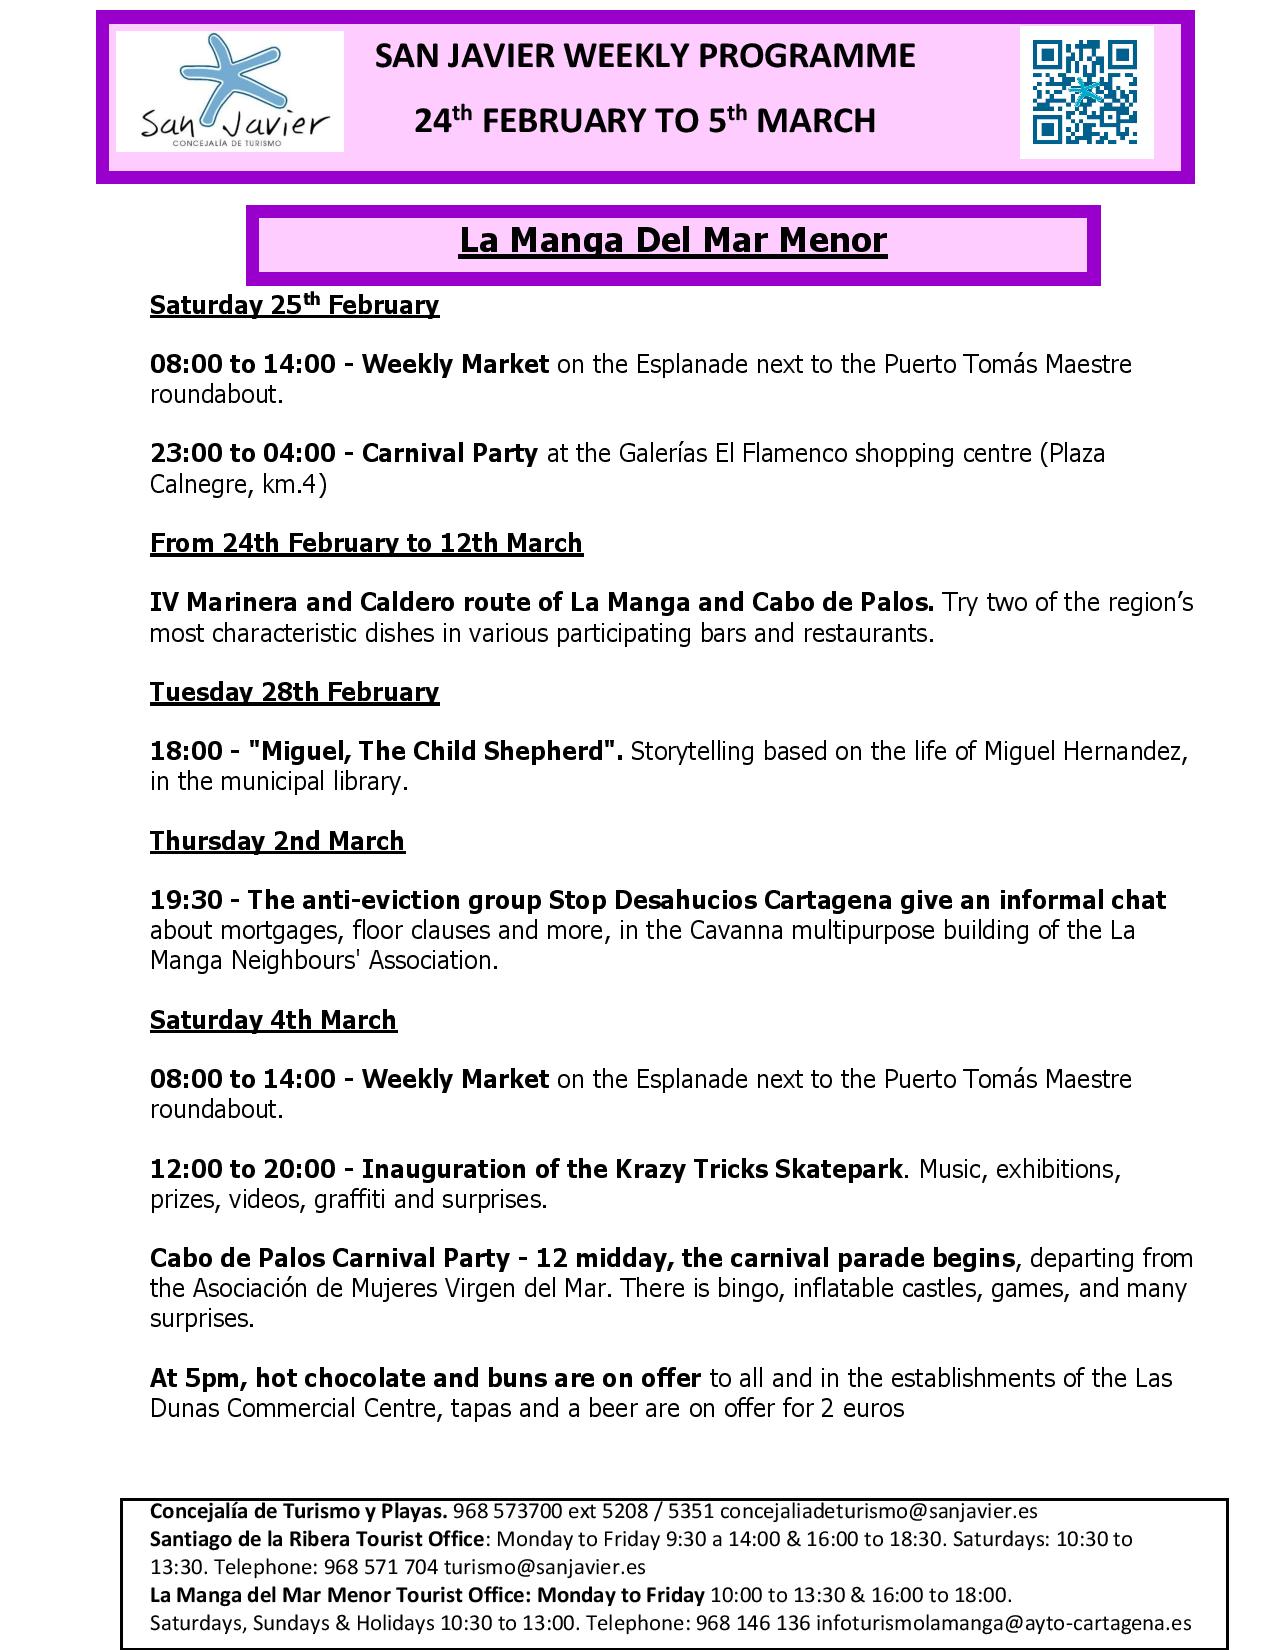 San Javier programme 24-02-17 to 05-03-17-1-page-005